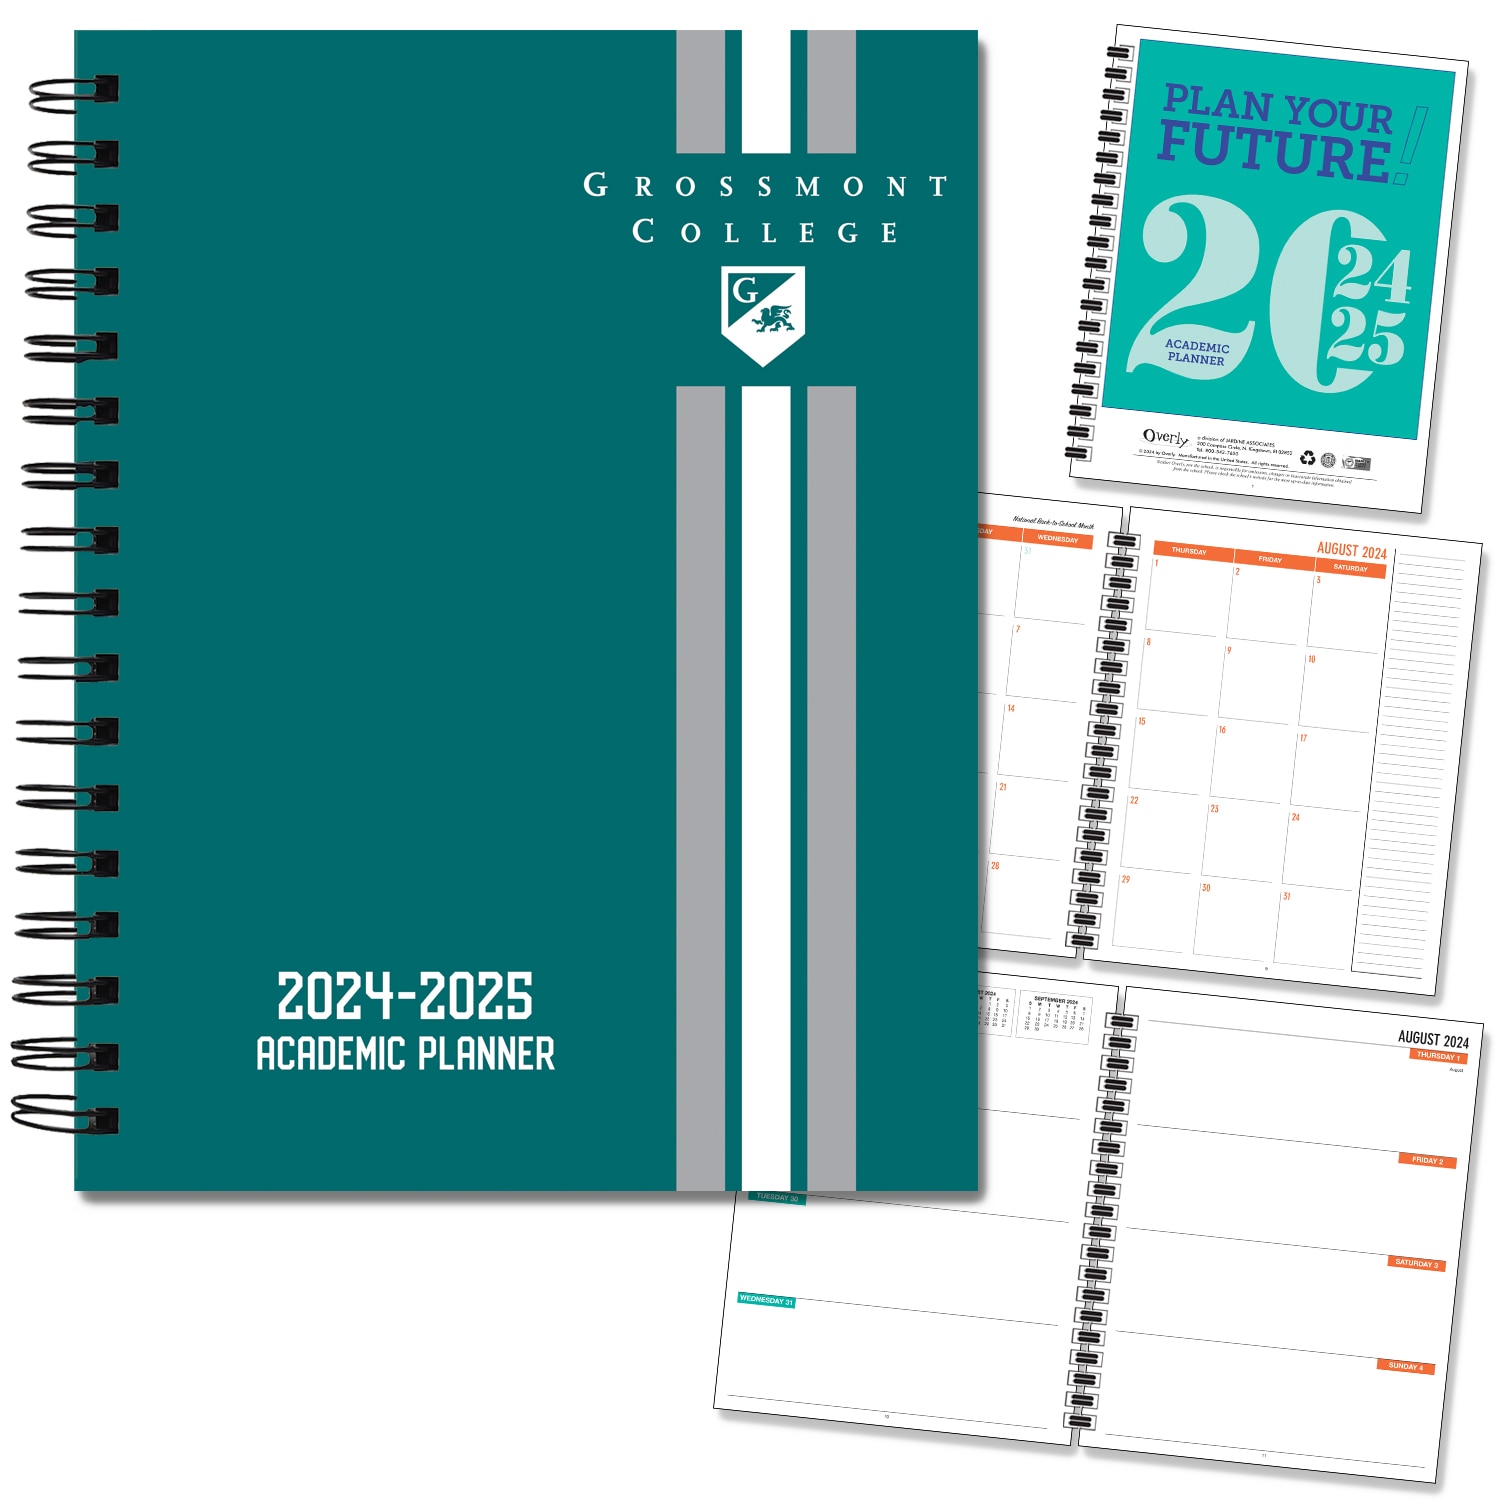 FY 25 Traditional Wordmark Hard Cover Imprinted Planner 24-25 AY 7x9